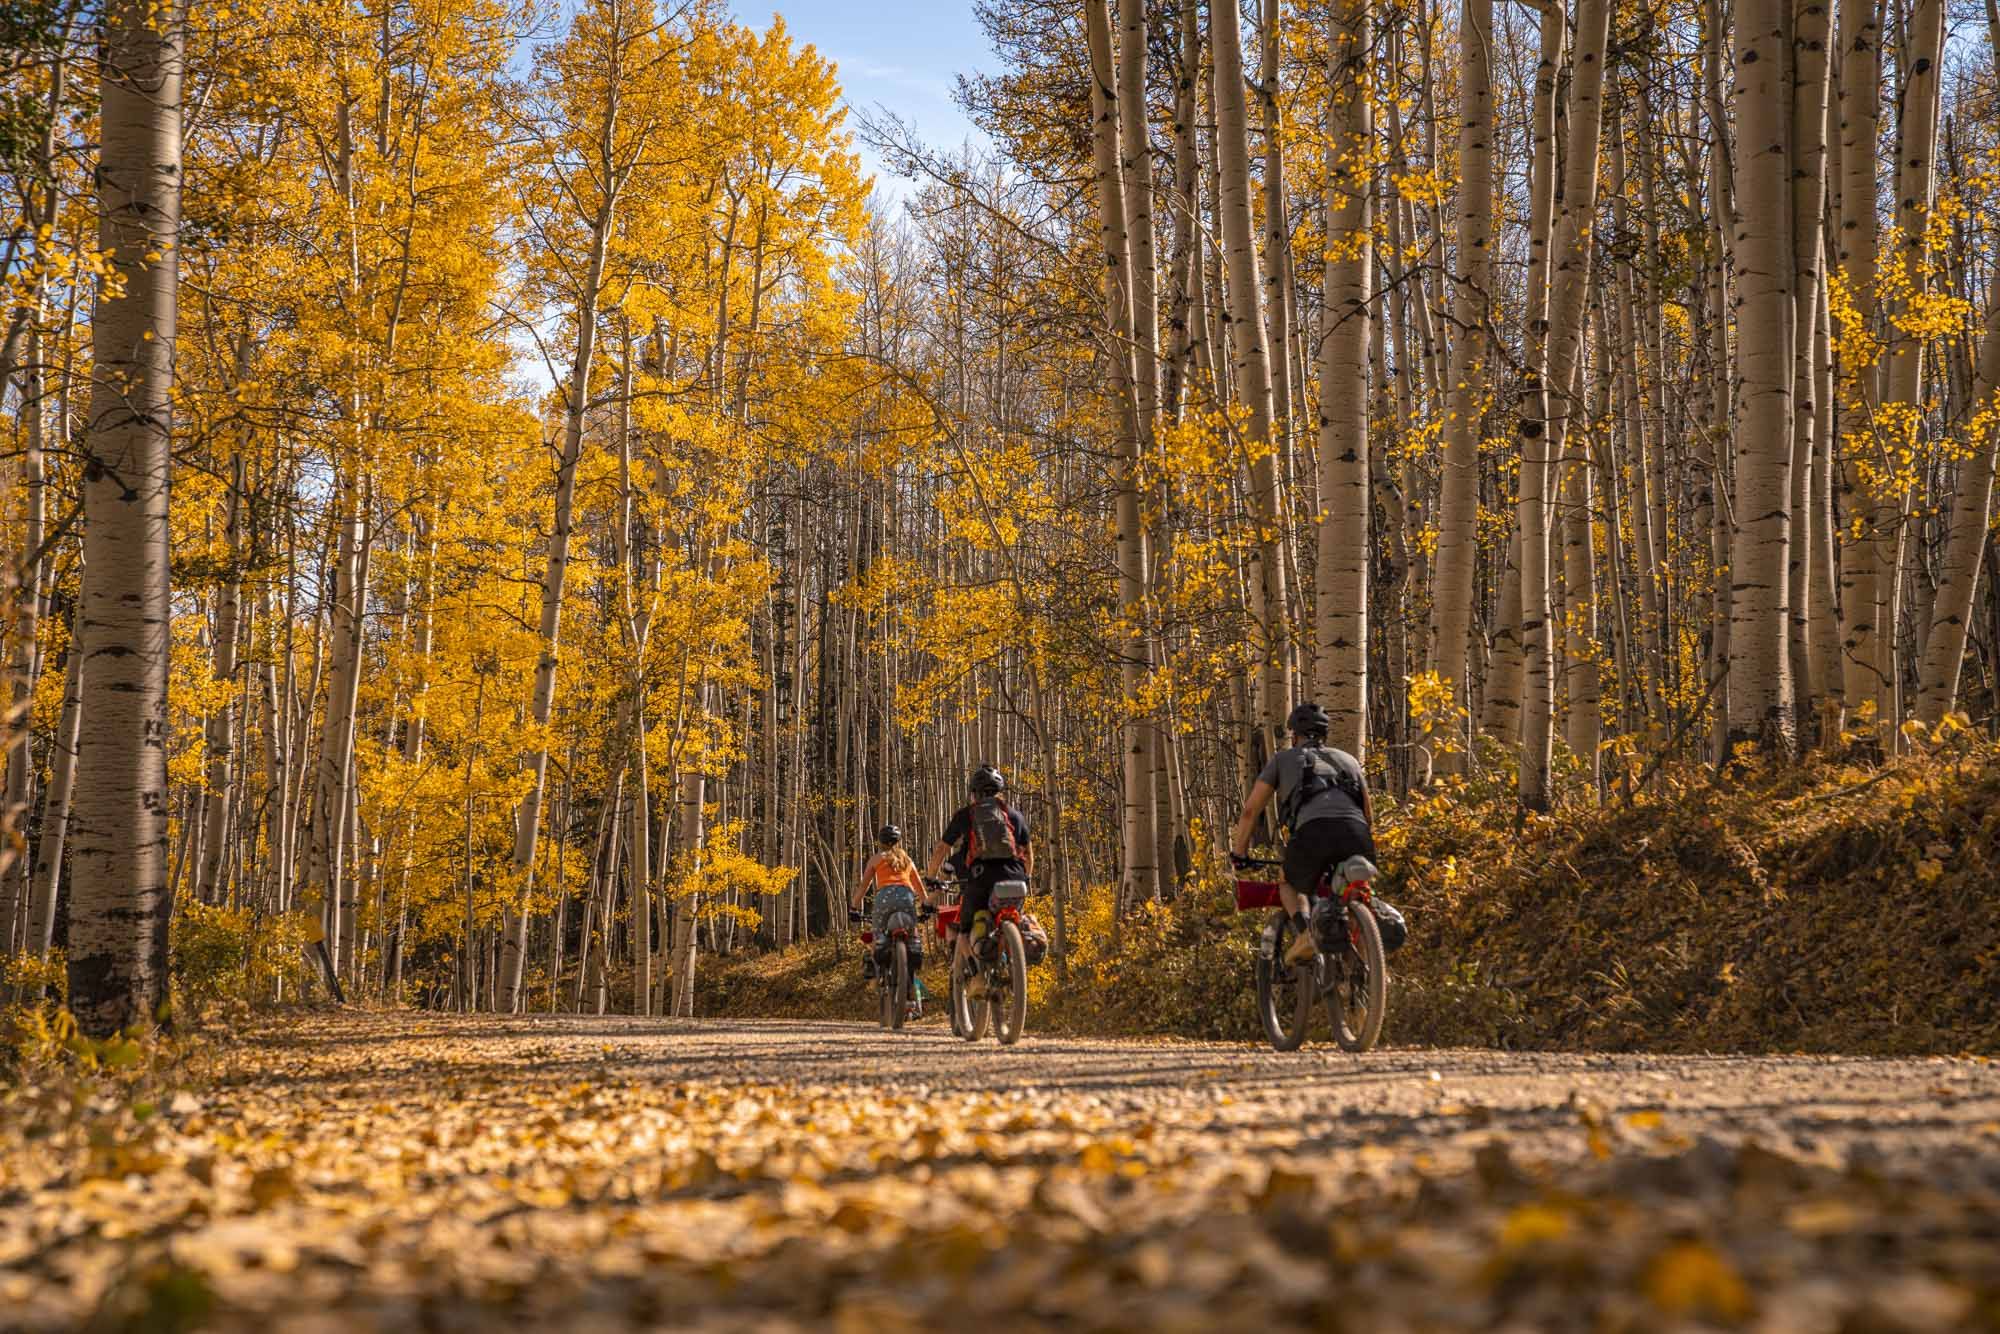 Three people ride gravel bikes on a path lined by fall trees